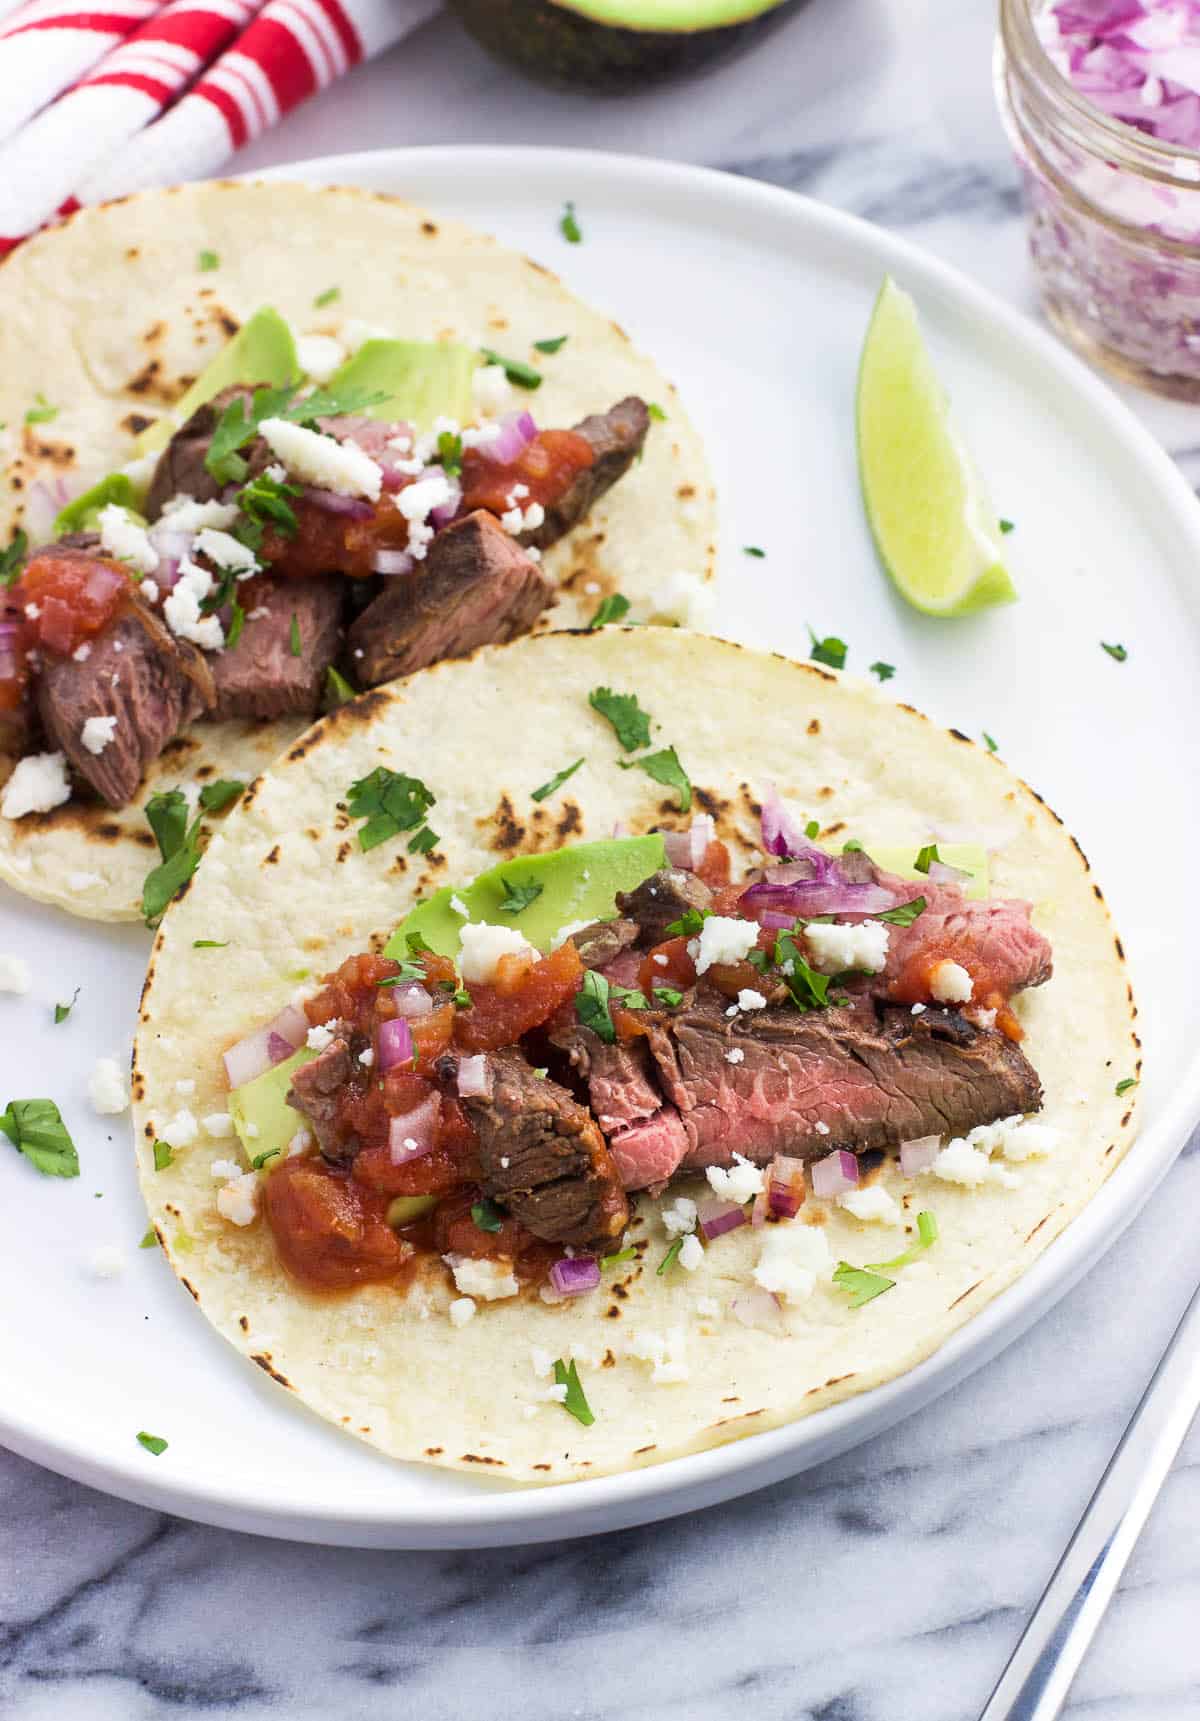 Two all-dressed carne asada tacos on a plate.